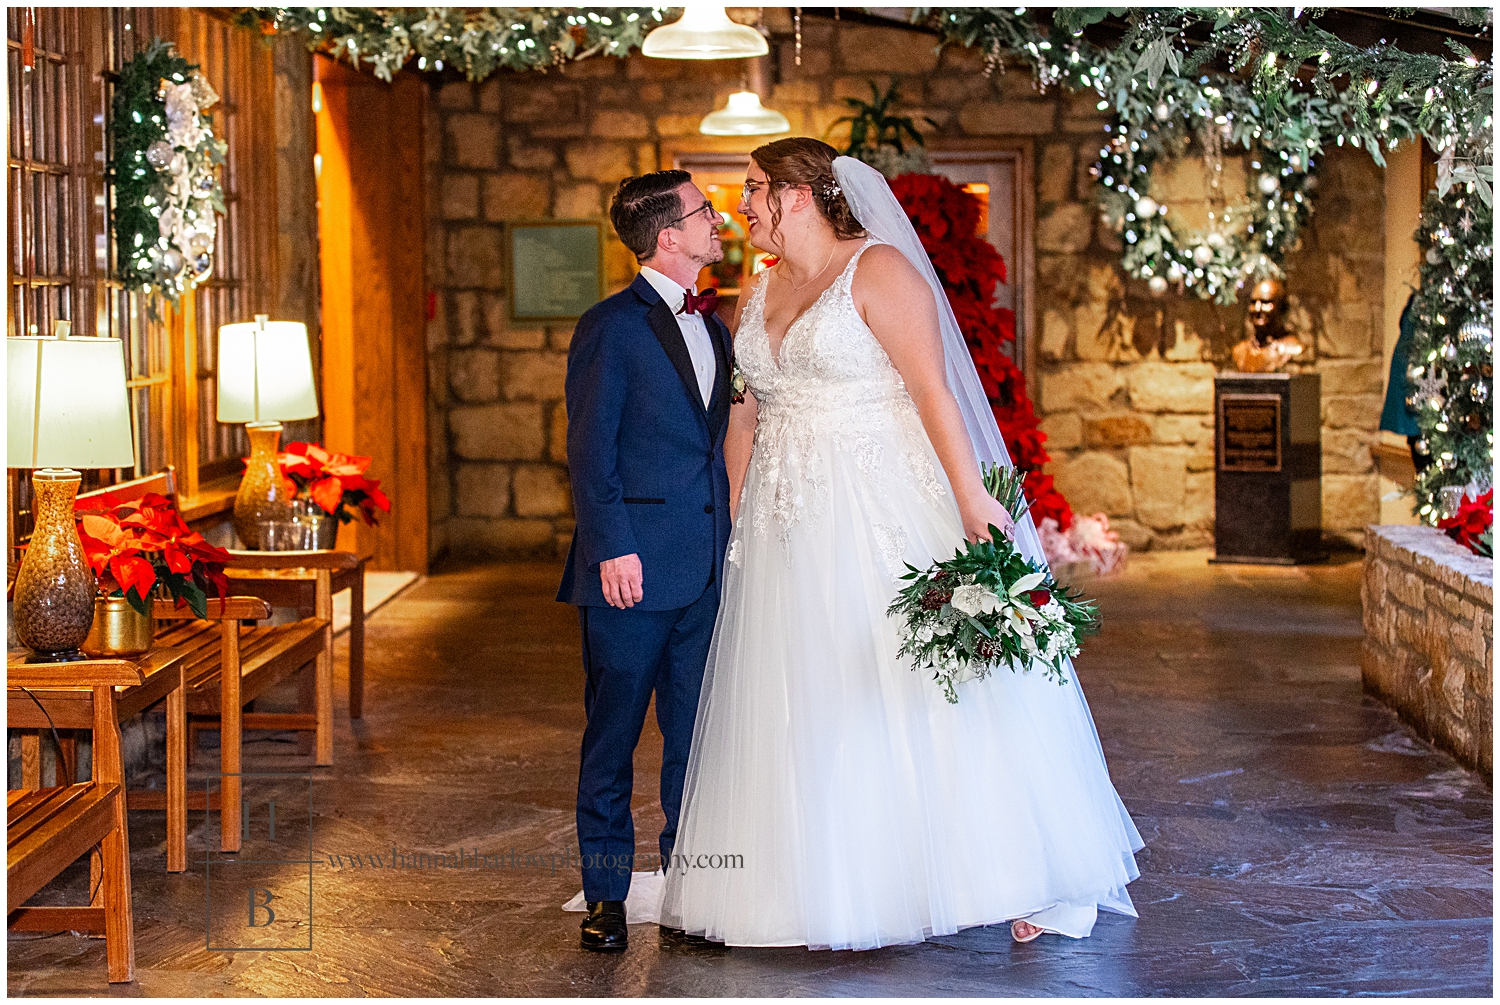 Bride and groom look at one another in stone hallway with holiday decor